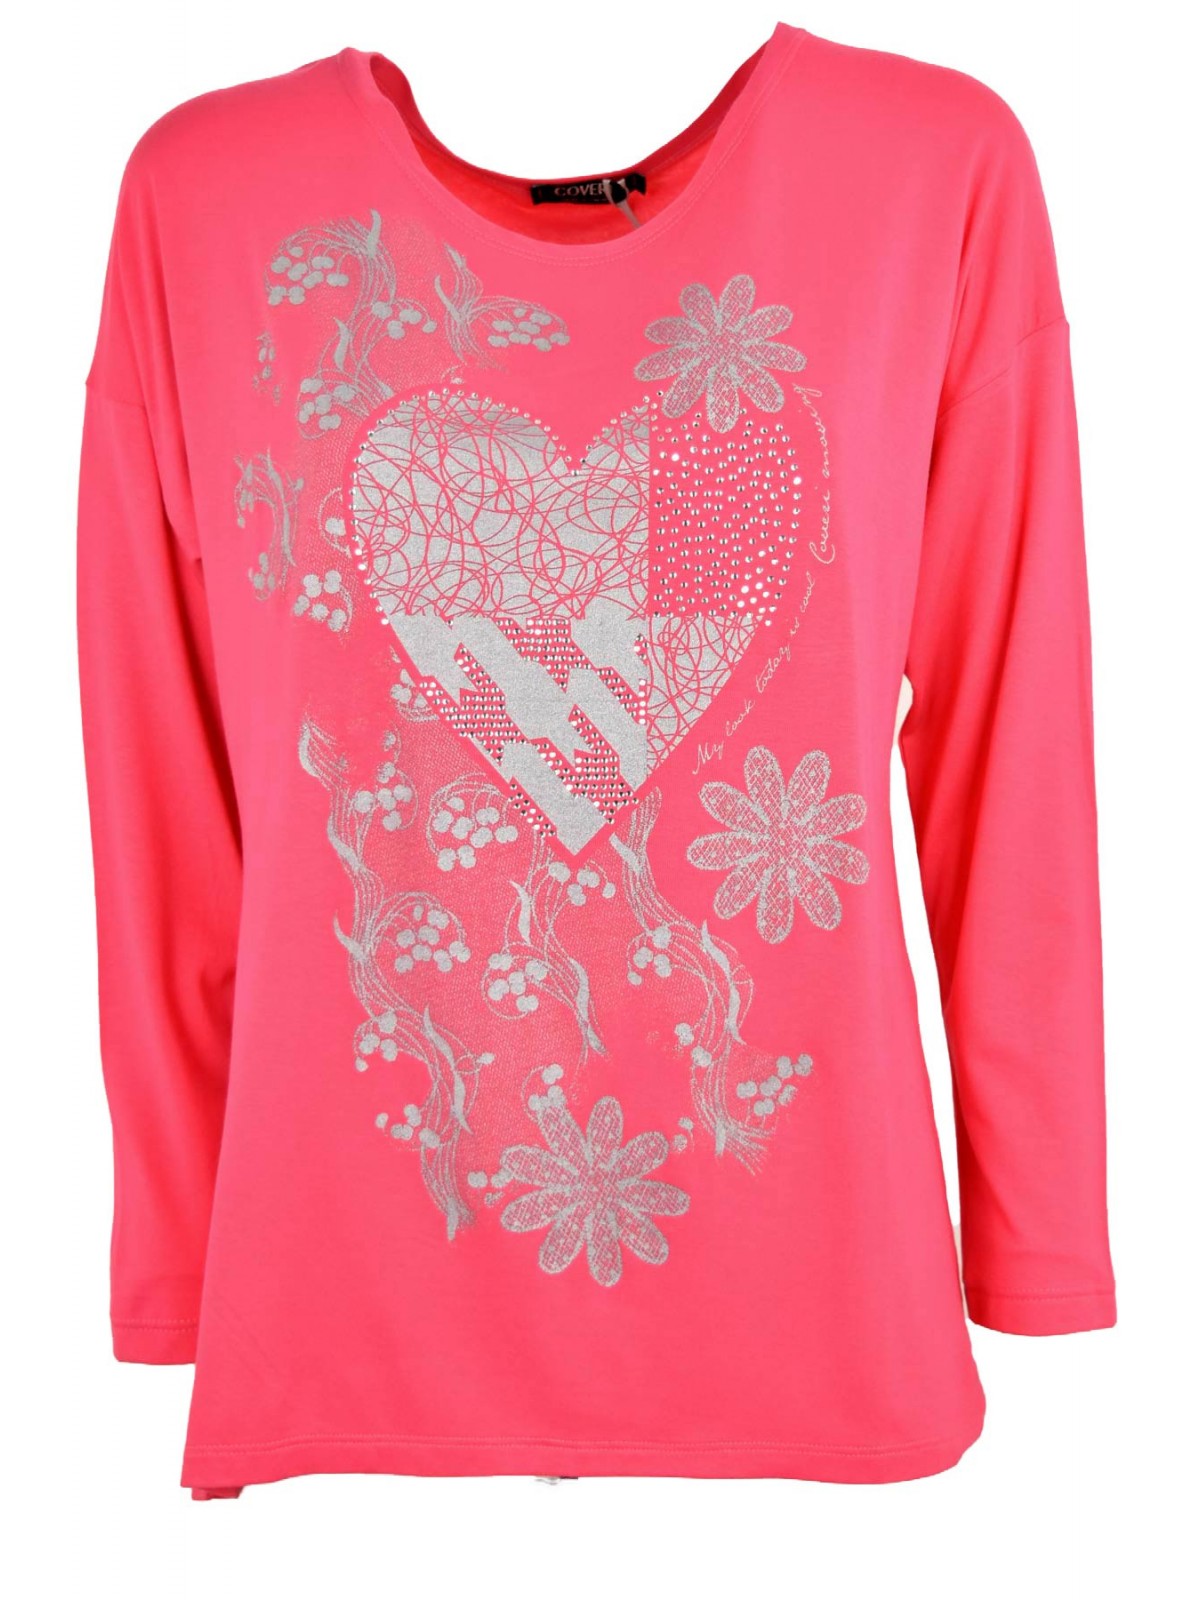 Jersey Woman Coral Pink Dress Large - Long Sleeves